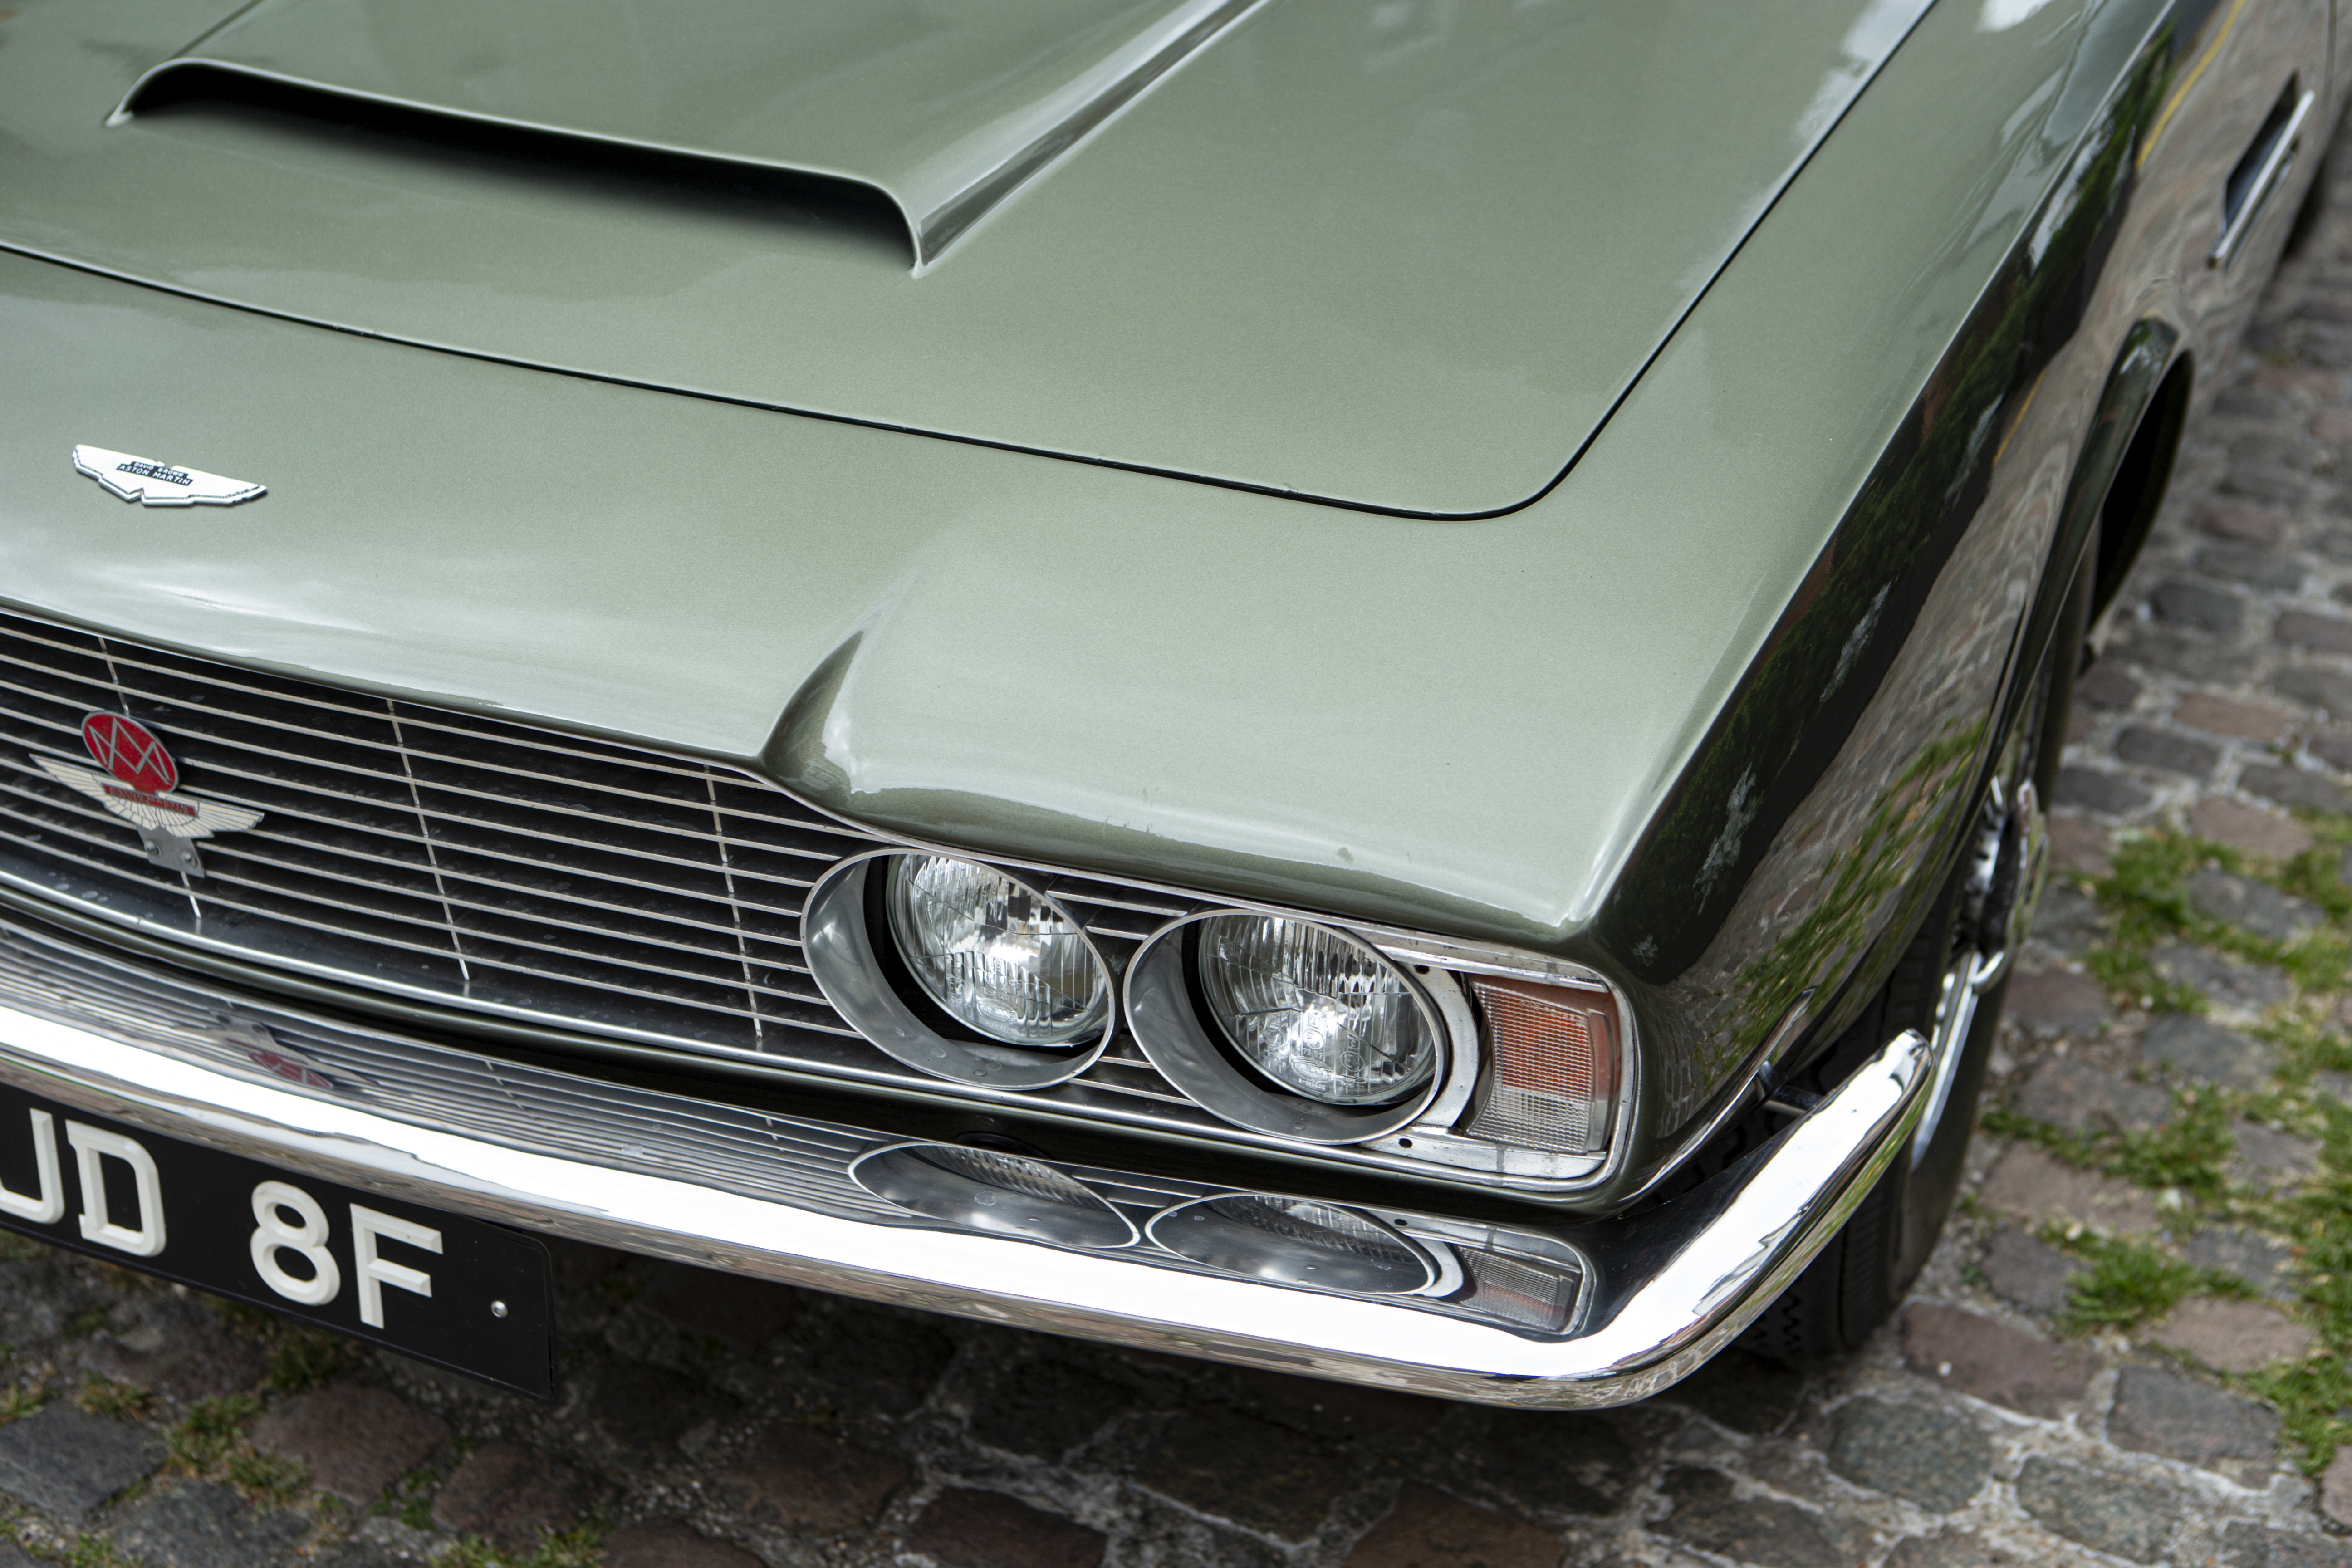 1968 Aston Martin DBS Chassis no. 400/5040/R - Image 20 of 48